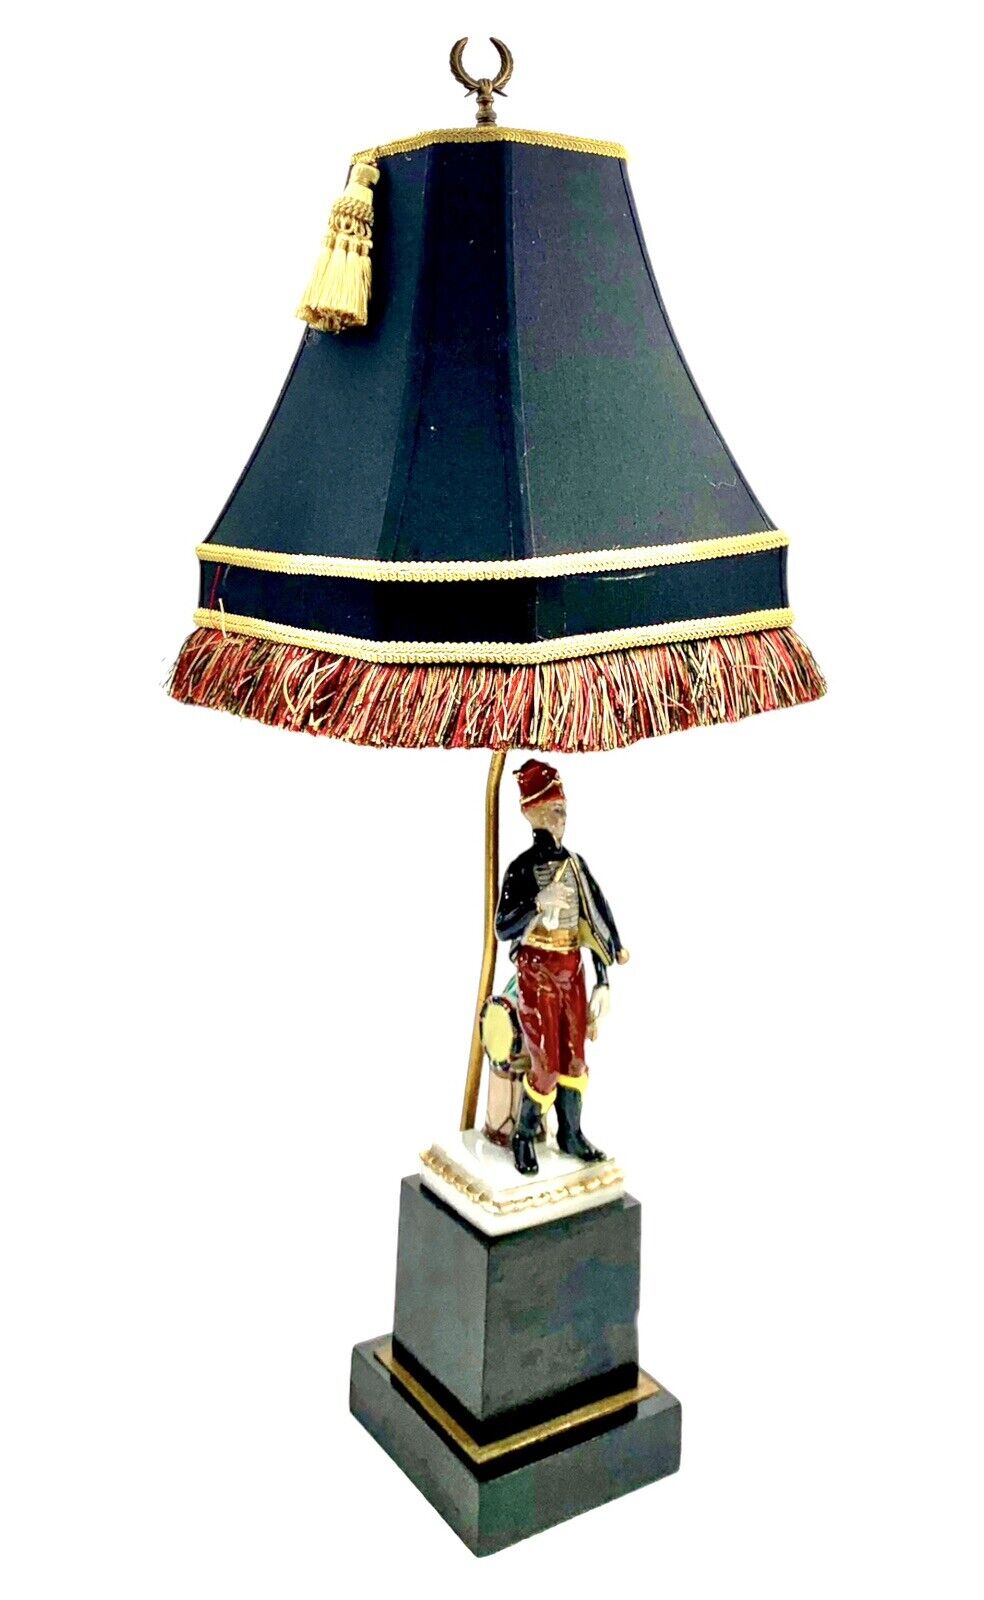 Vintage Lamp With Royal Soldier Porcelain Figurine on Wooden Base Classic Decor